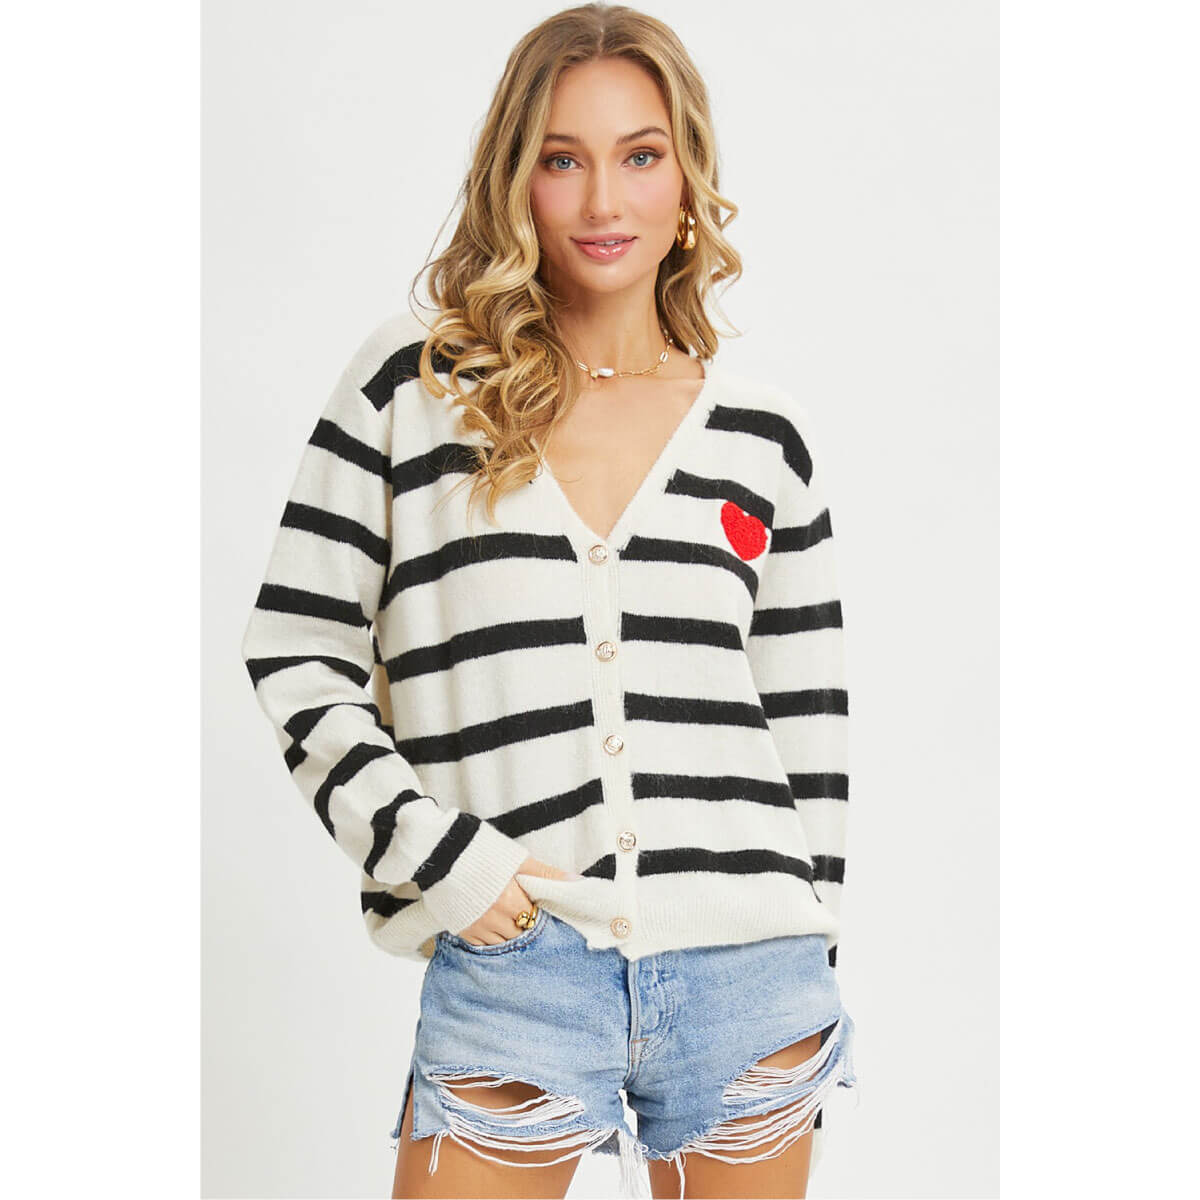 Trendy Women's Sweaters  Find Fashionable Sweaters at Milk Money